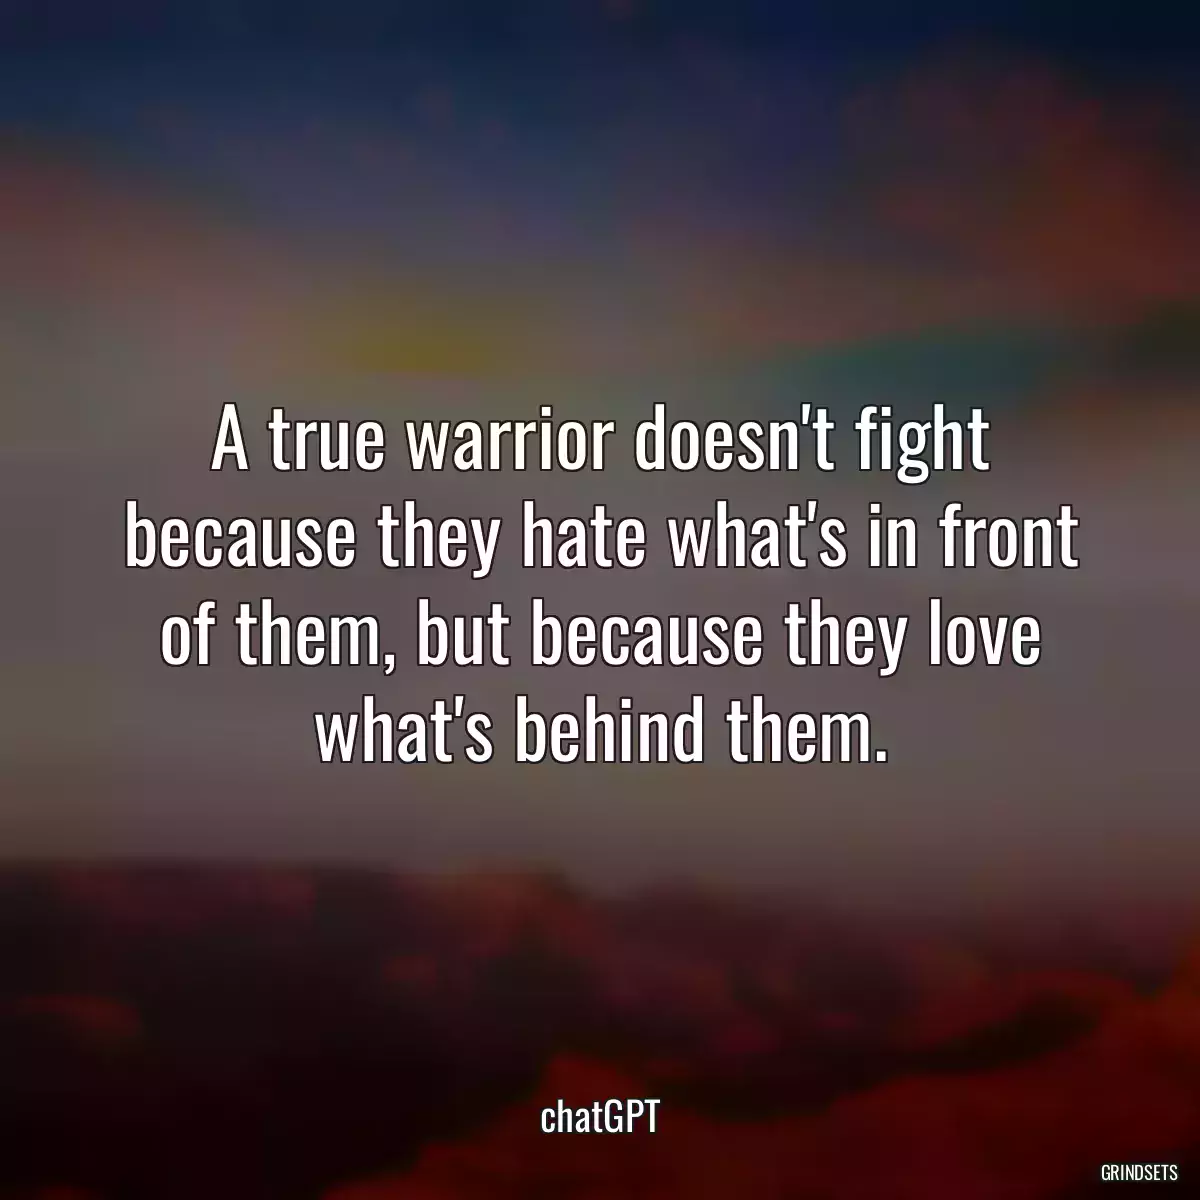 A true warrior doesn\'t fight because they hate what\'s in front of them, but because they love what\'s behind them.